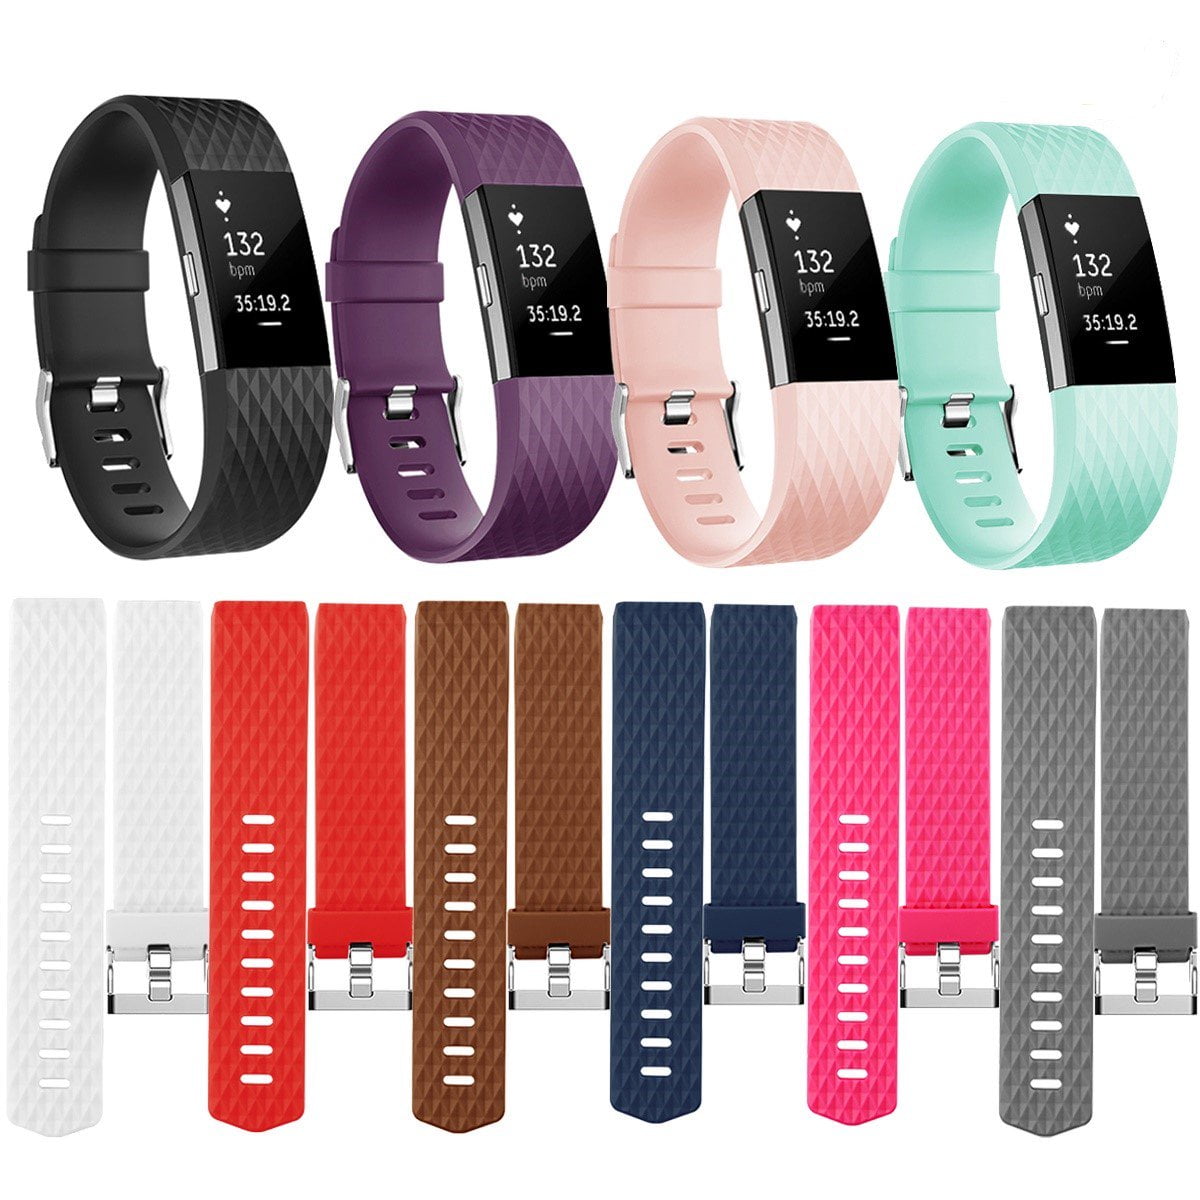 6 Pack Sport Bands Compatible with Fitbit Charge 2 Bands Adjustable Replacement Wristbands for Women Men Small Large 6 Pack B, Small 